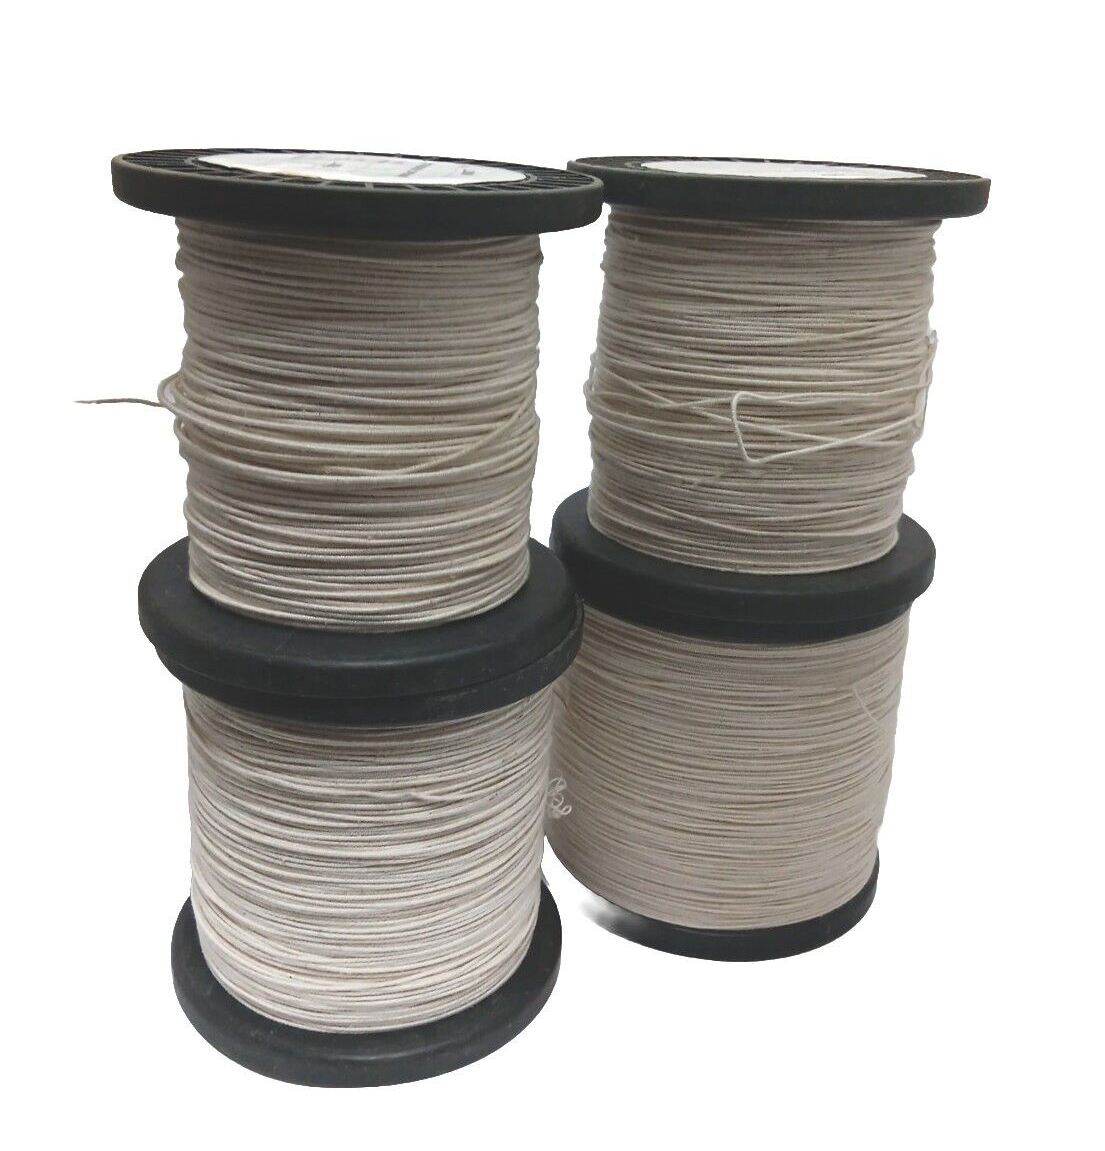 Kg 0.71mm Double Cotton Covered Copper Craft Wire